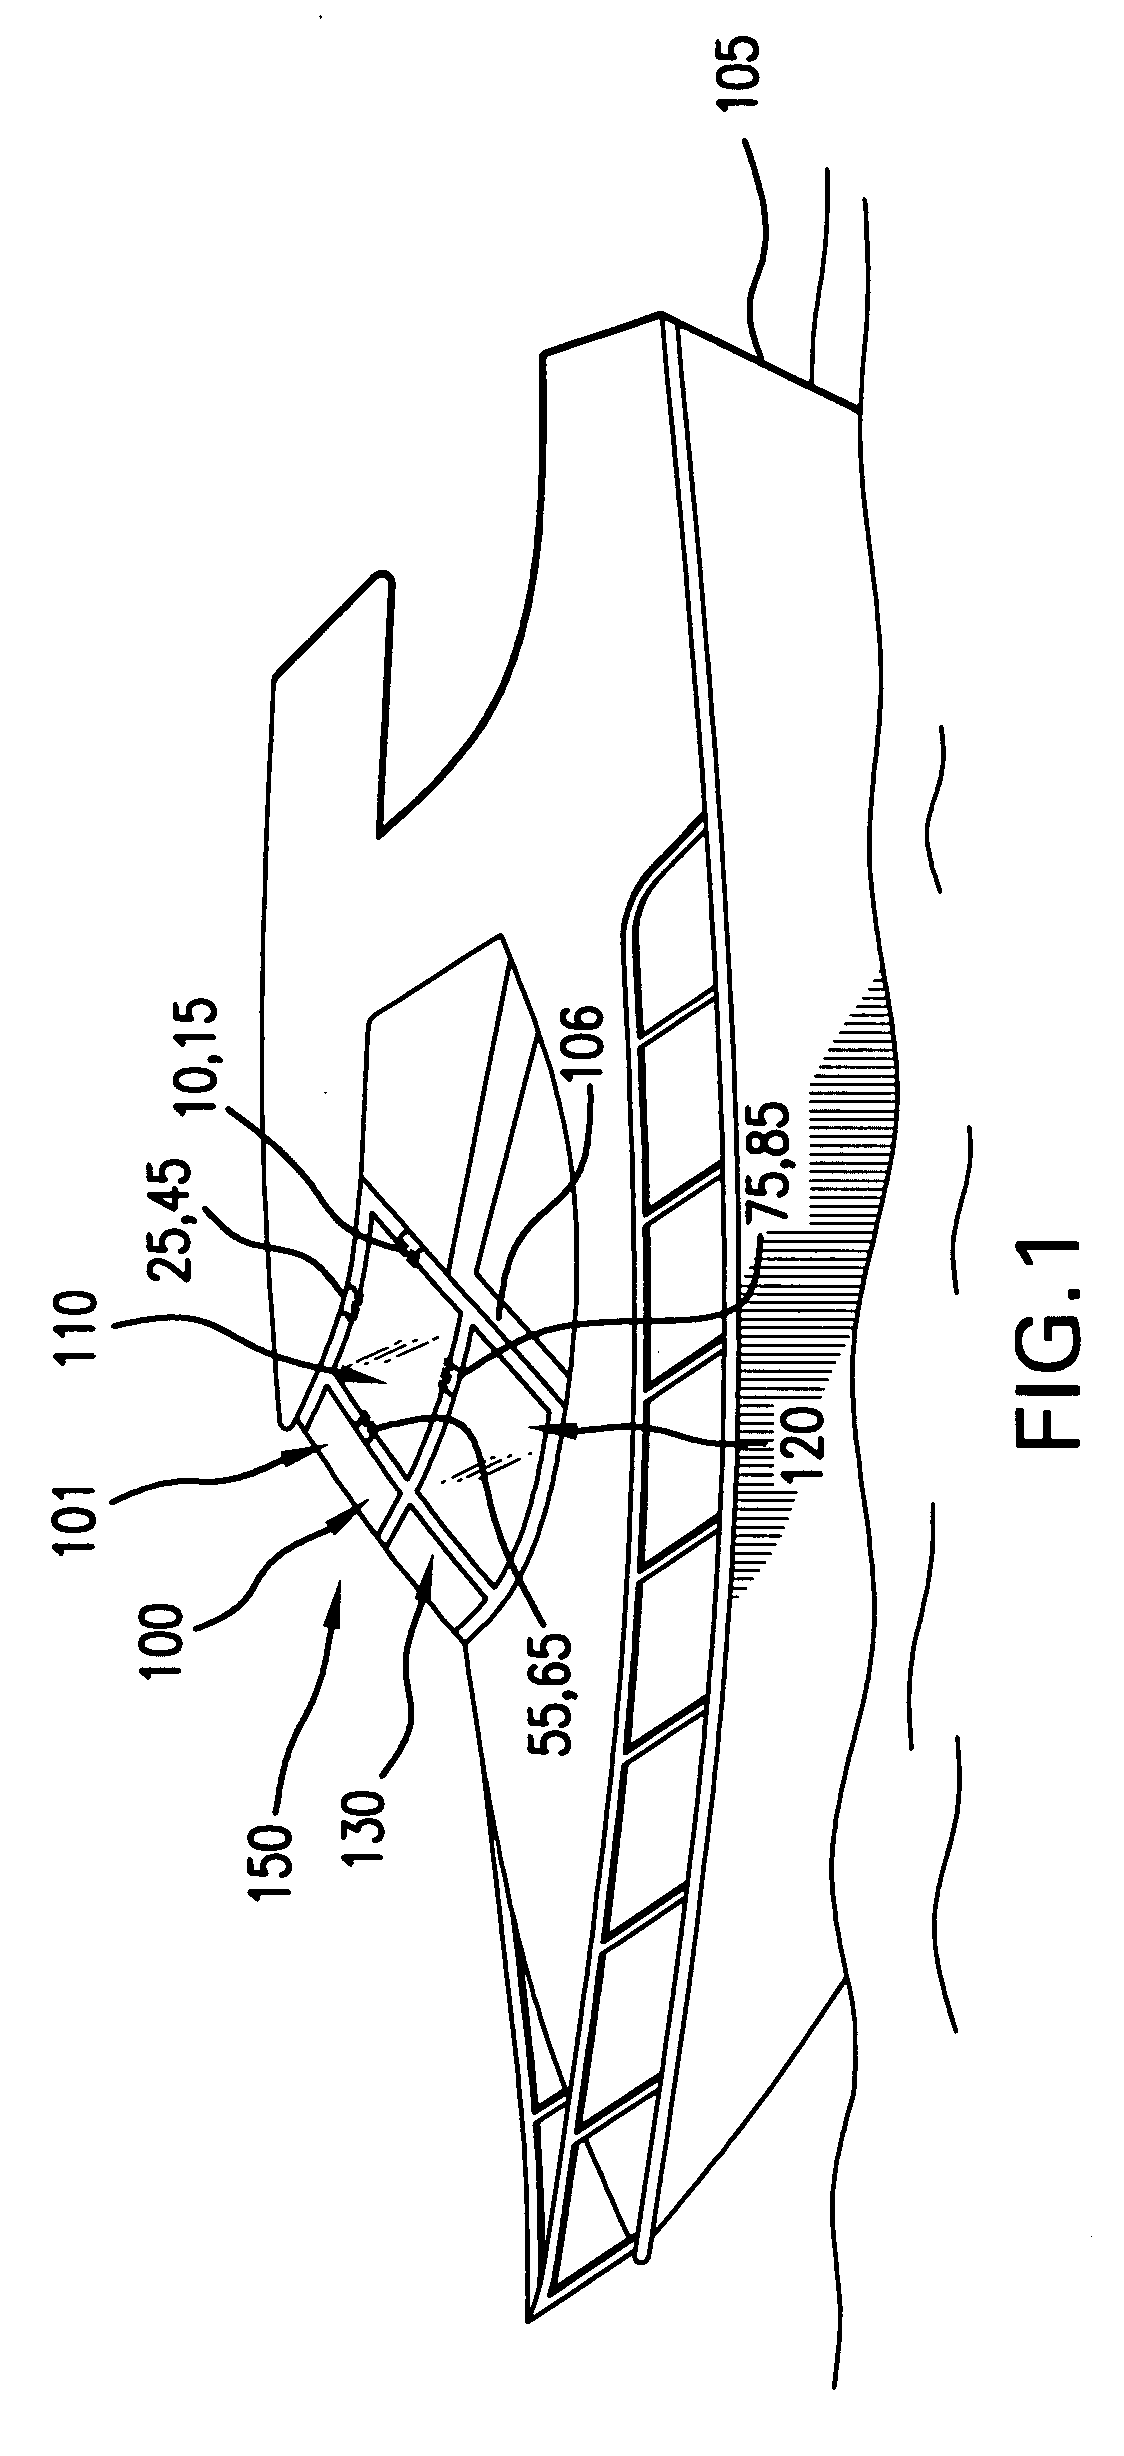 Connection device and a method of forming a panel assembly